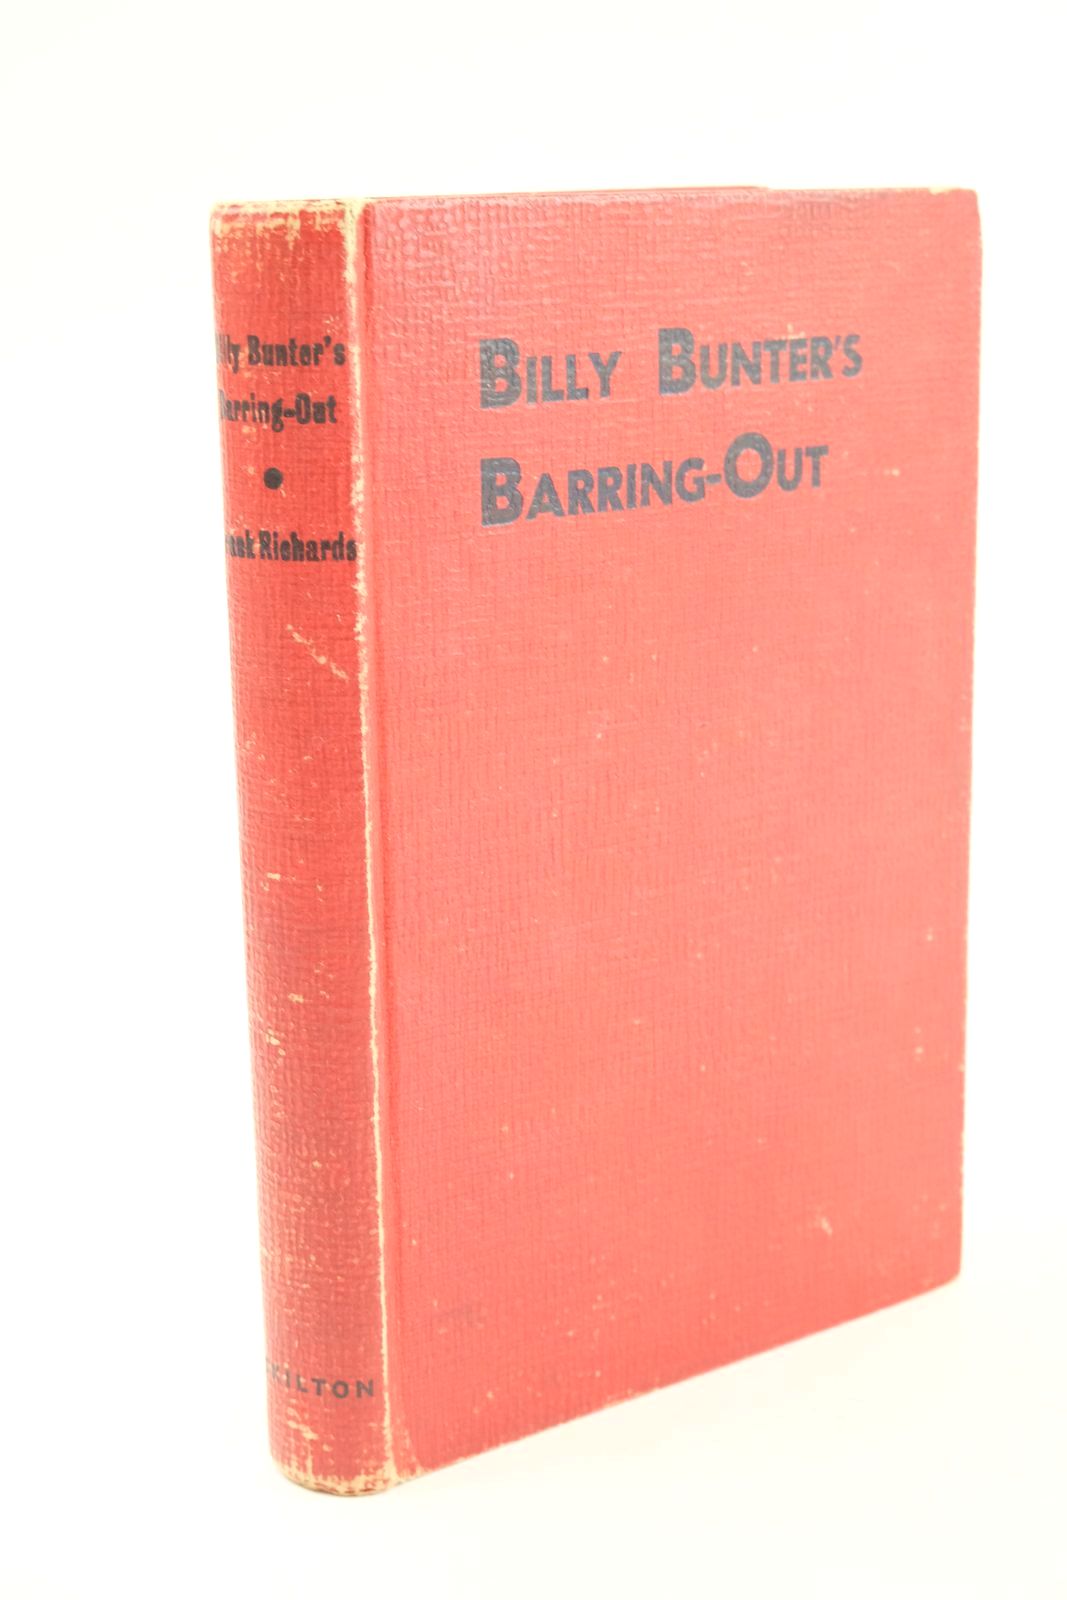 Photo of BILLY BUNTER'S BARRING-OUT- Stock Number: 1323966